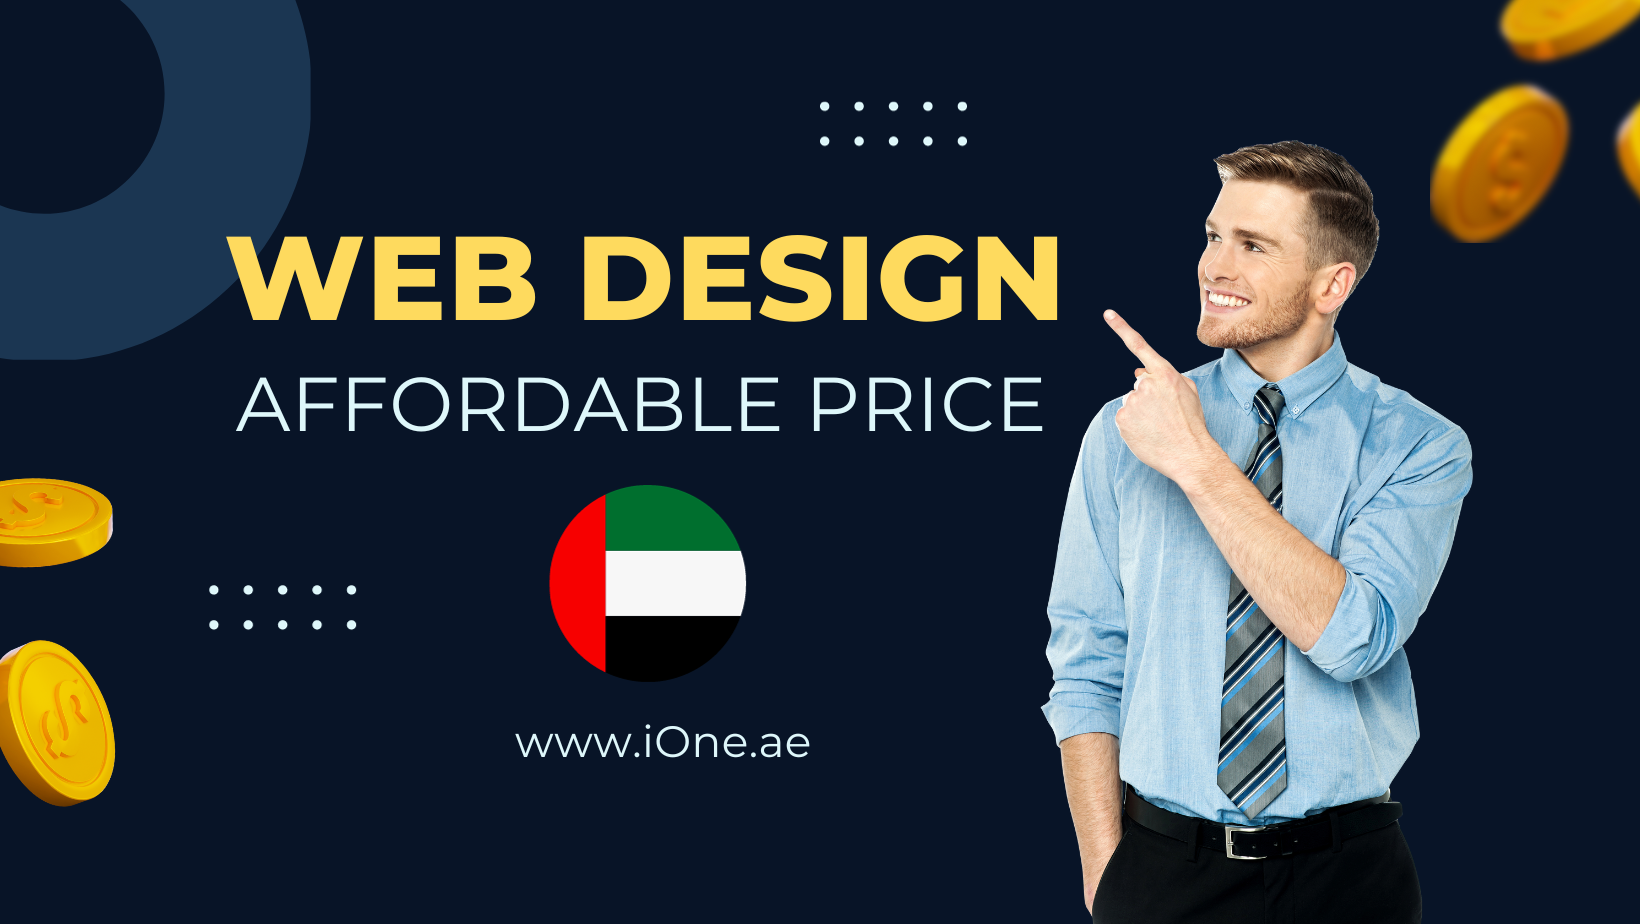 Website Design Affordable Price and Low Cost